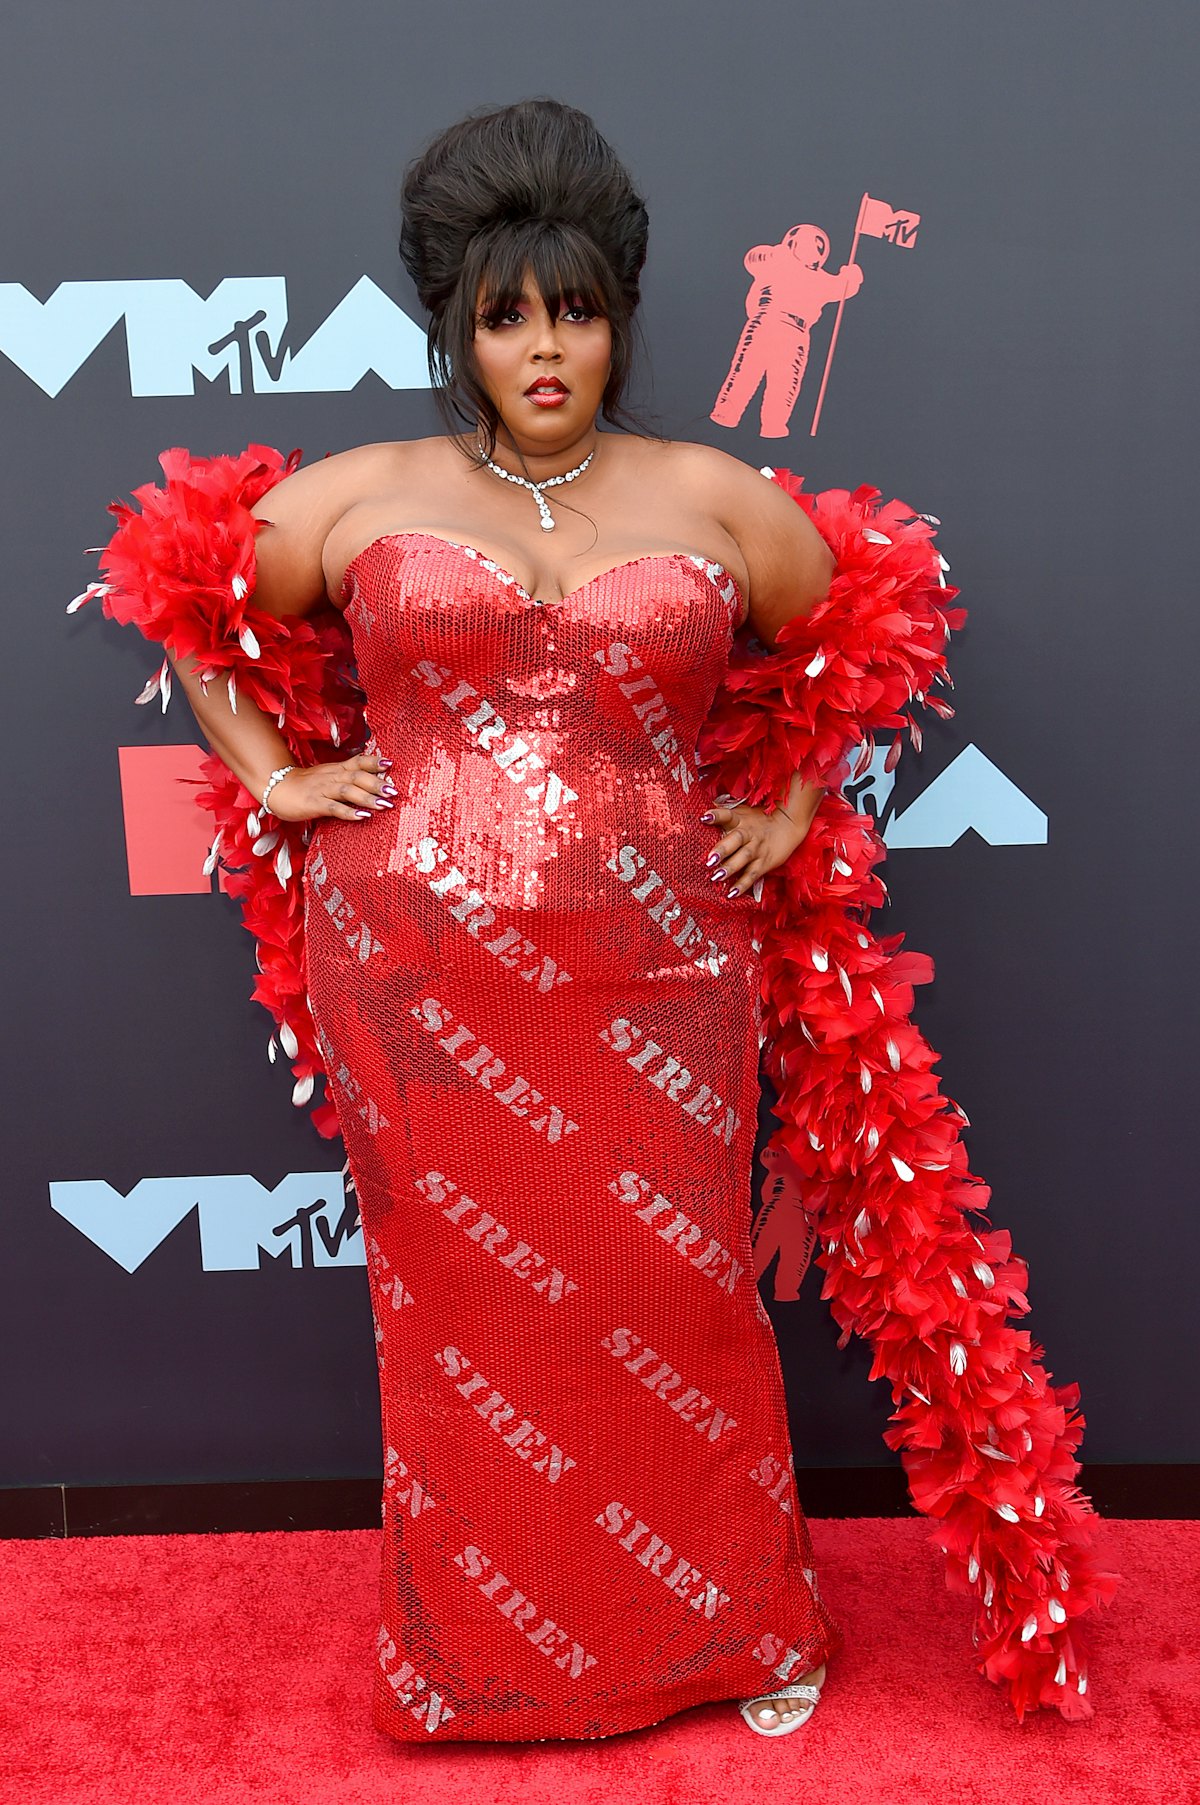 4 Lizzo 2019 Halloween Costumes That Will Make You Feel 150 That B*tch